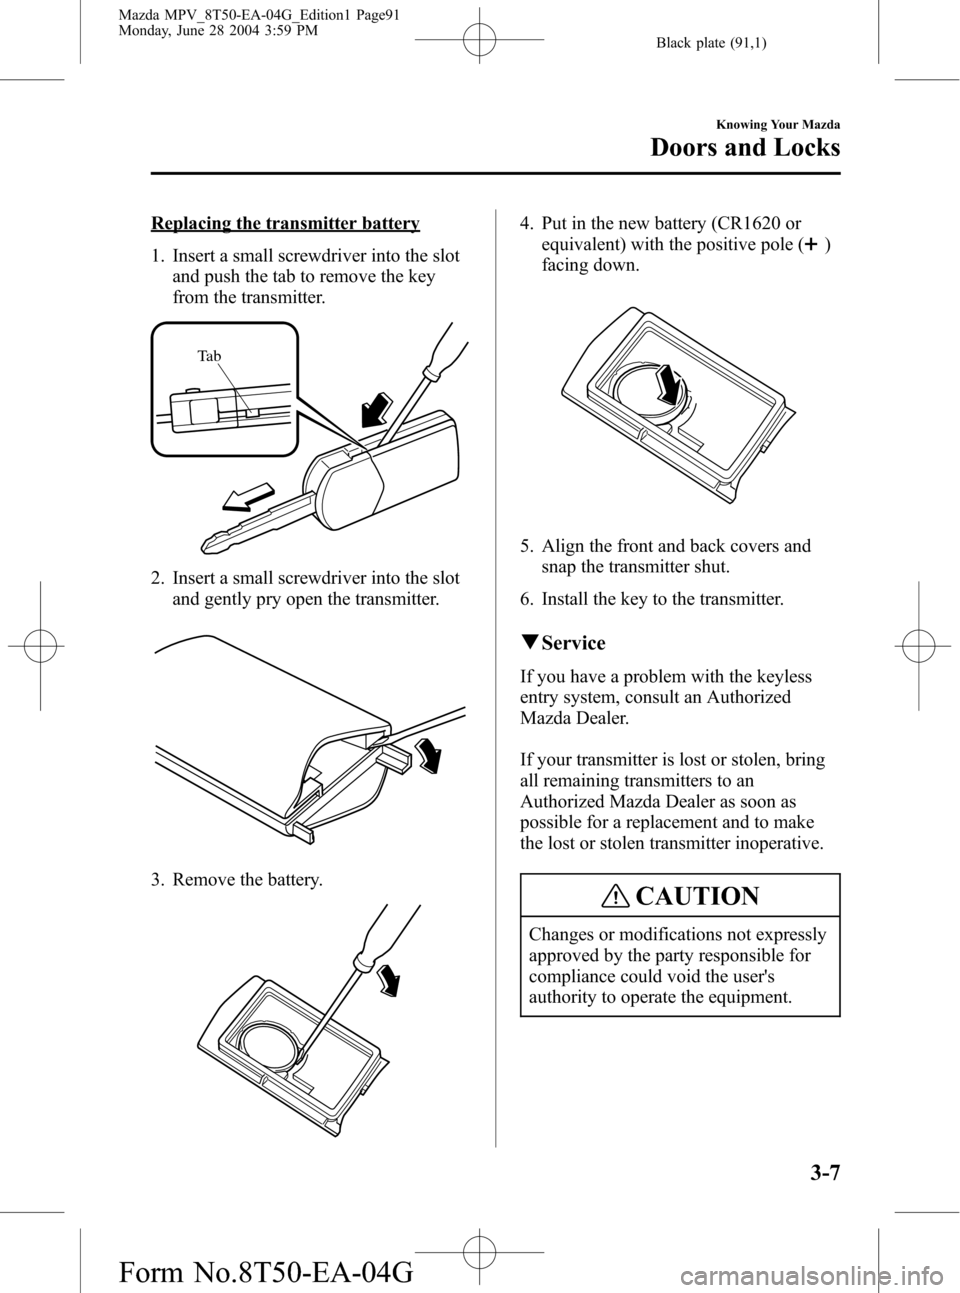 MAZDA MODEL MPV 2005  Owners Manual (in English) Black plate (91,1)
Replacing the transmitter battery
1. Insert a small screwdriver into the slot
and push the tab to remove the key
from the transmitter.
Ta b
2. Insert a small screwdriver into the sl